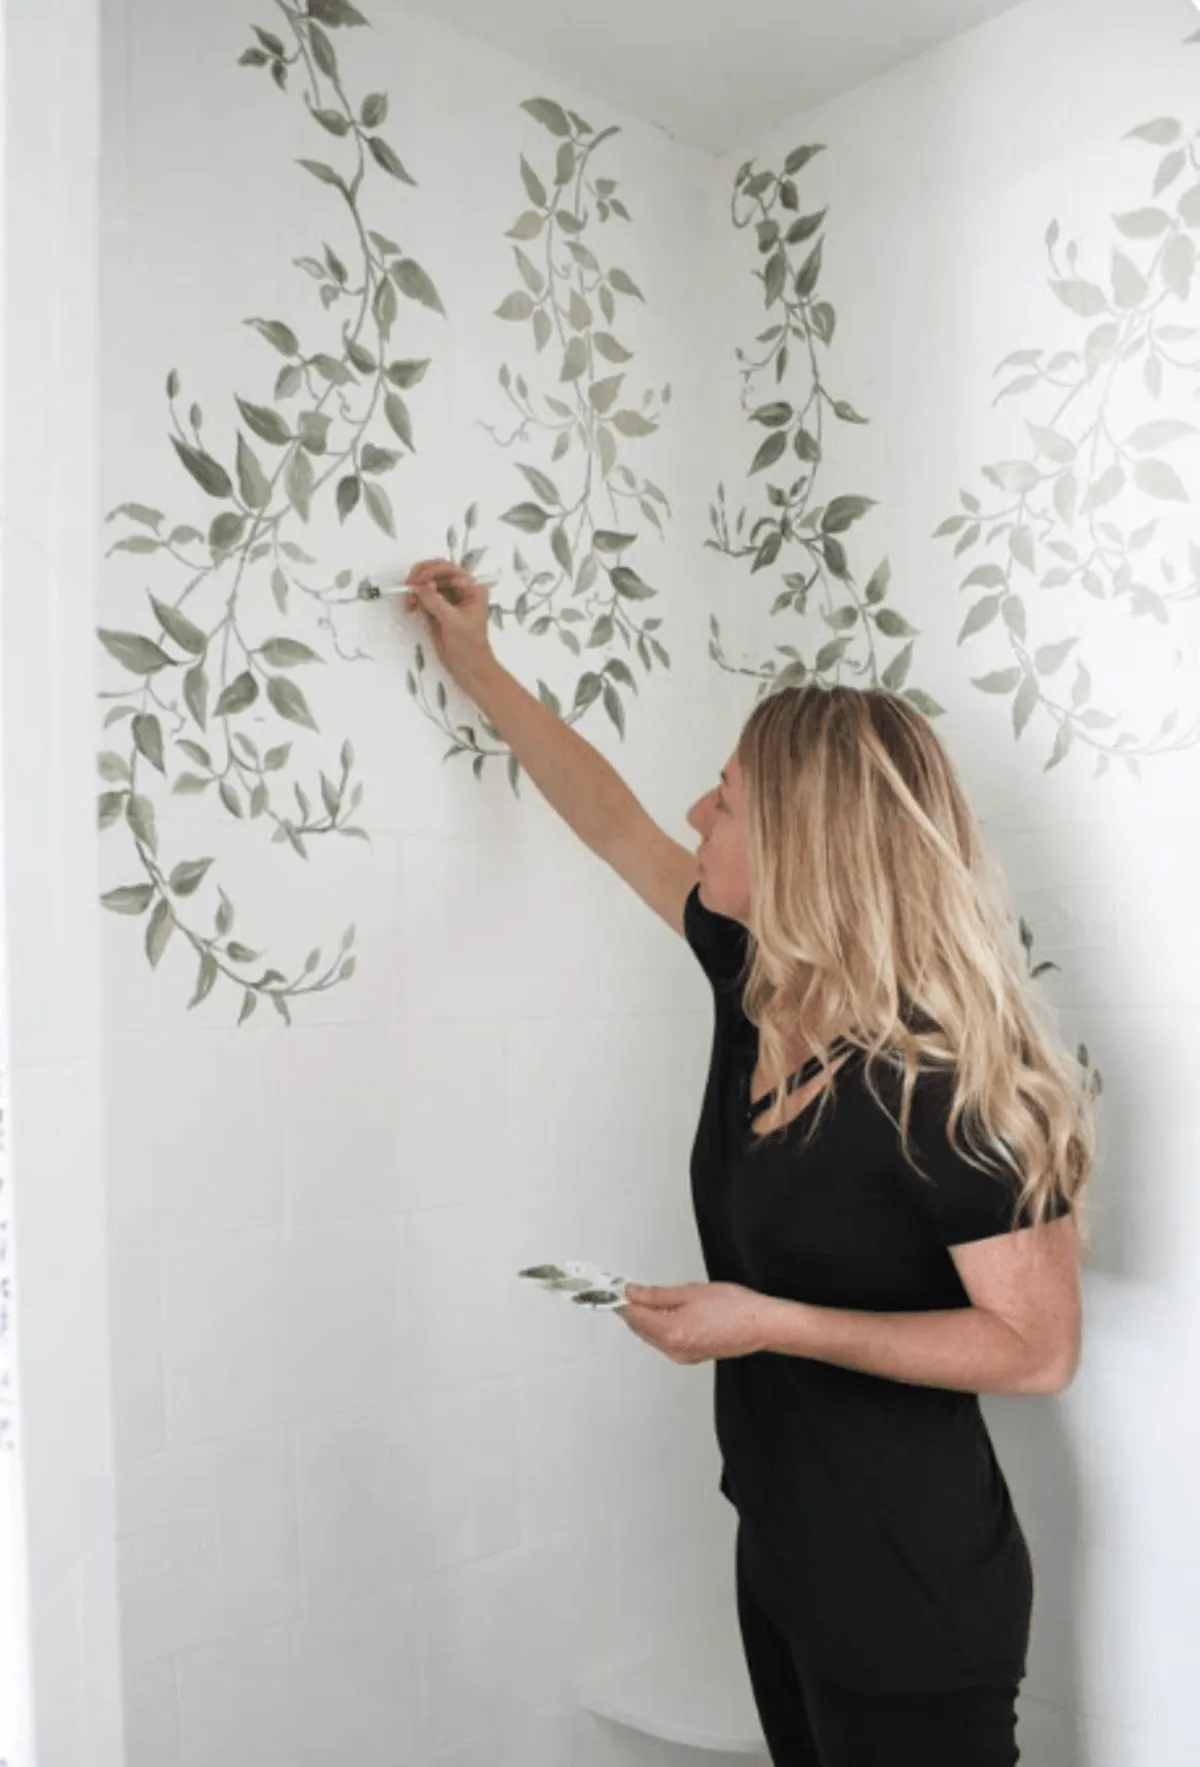 Artist painting a mural featuring foliage and green vines on plain white bathroom wall tiles